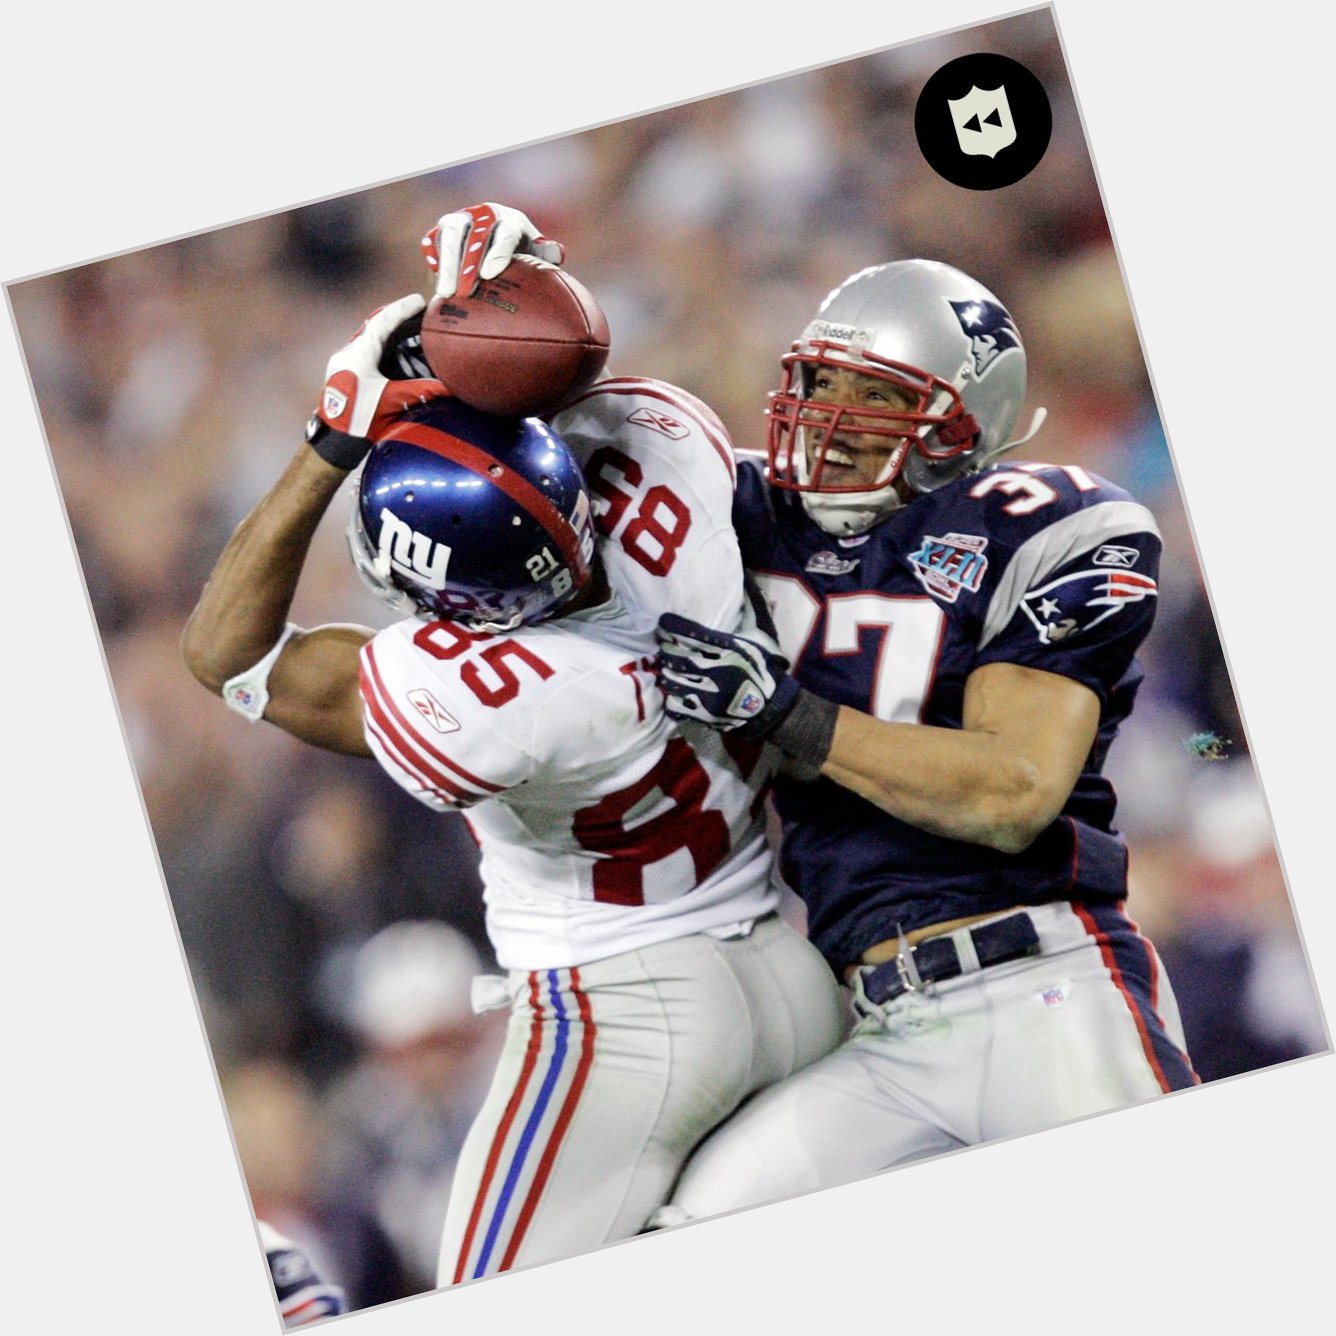 Where were you when The Helmet Catch happened? (Feb. 3, 2008)

Happy birthday to both & David Tyree! 